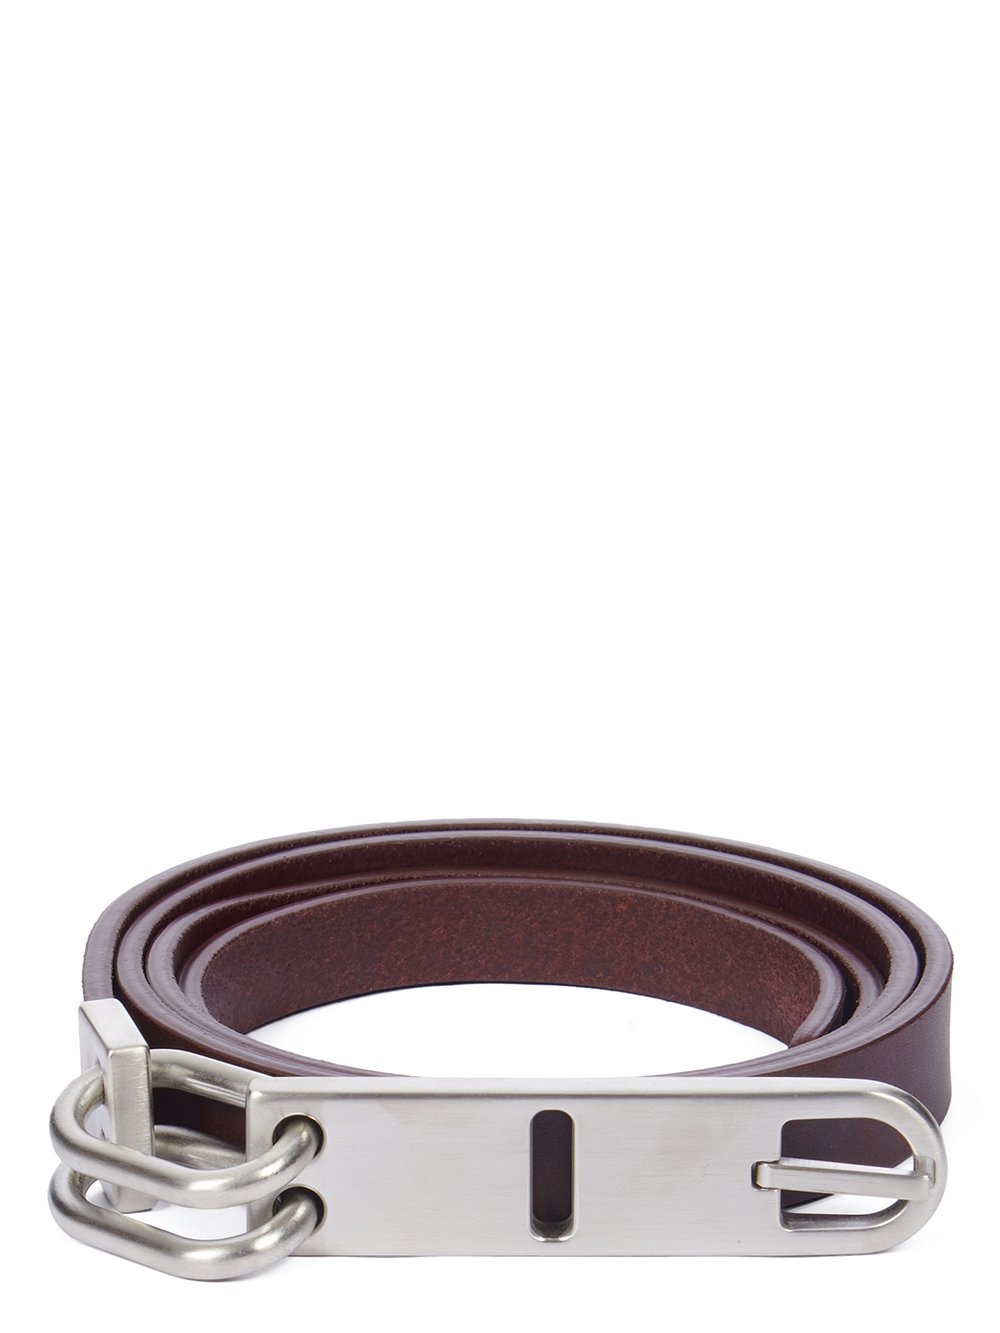 RICK OWENS FW23 LUXOR TONGUE BELT IN AMETHYST GROPPONE COW LEATHER